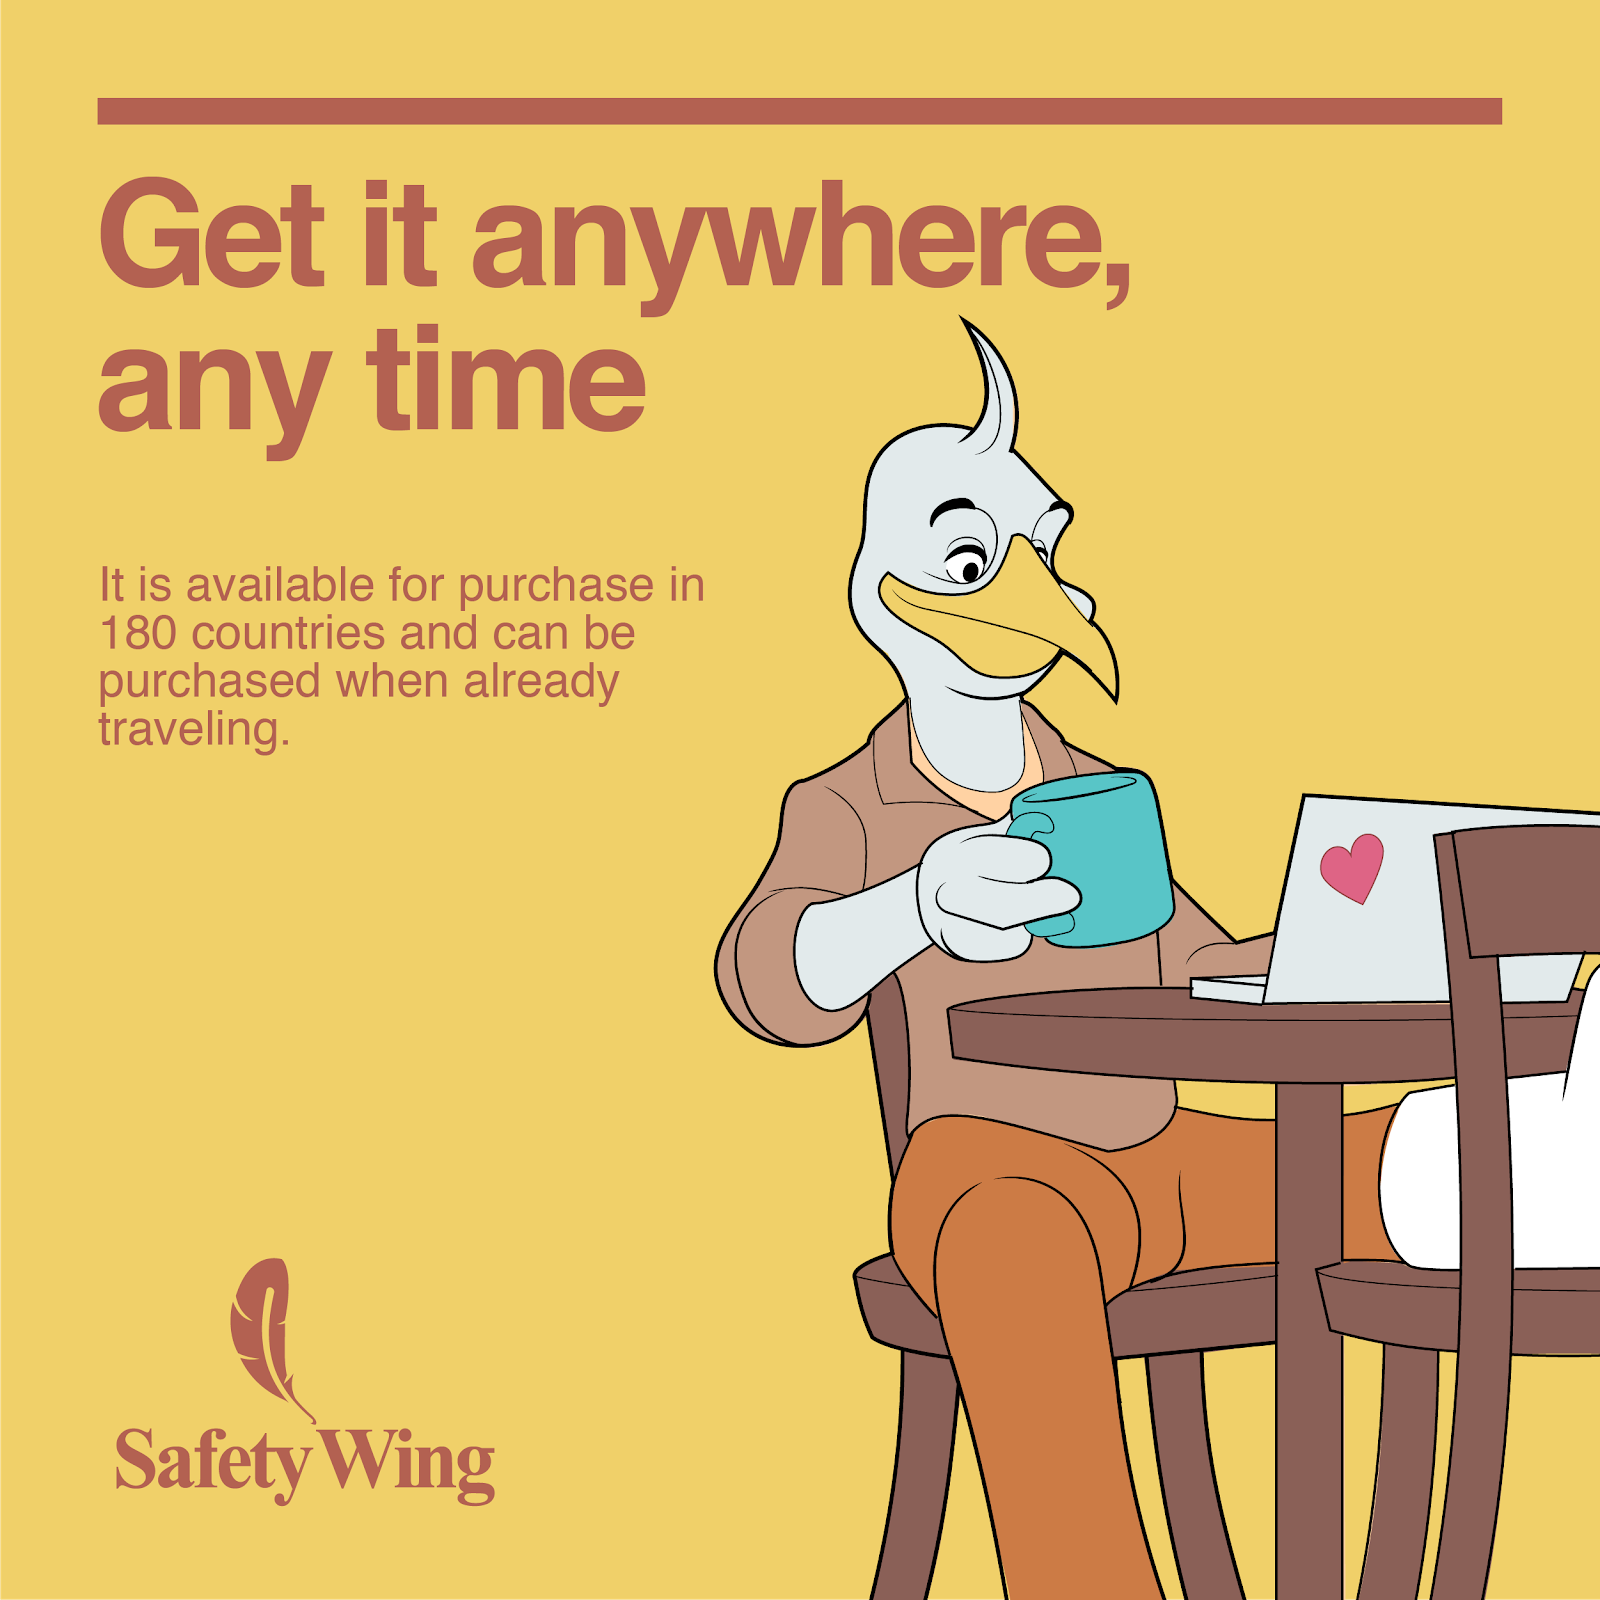 Wide coverage of SafetyWing Travel Insurance